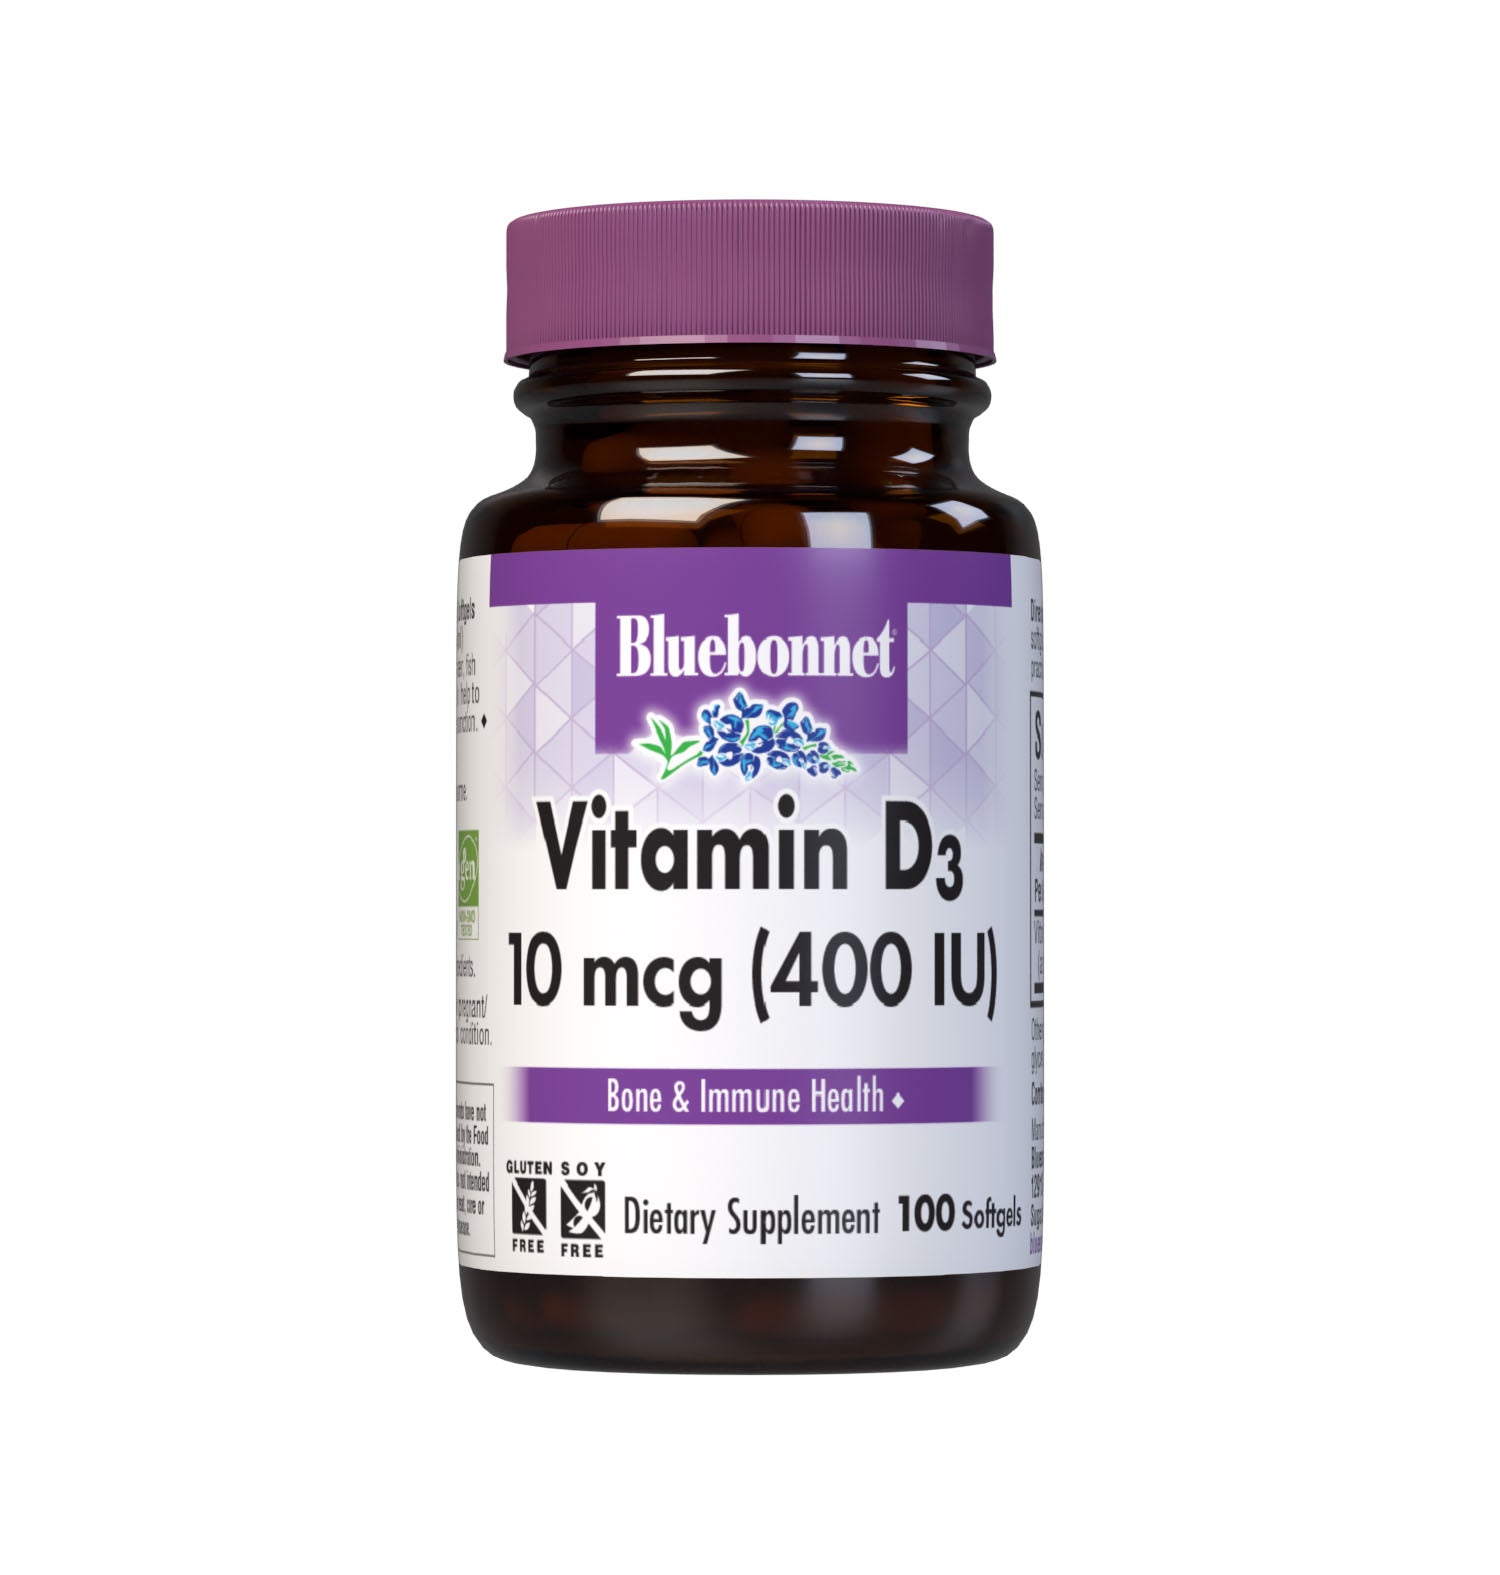 Bluebonnet’s Vitamin D3 400 IU 100 Softgels are formulated with vitamin D3 (cholecalciferol) from molecularly distilled, deep sea, cold water, fish liver oil in a base of non-GMO safflower oil. #size_100 count